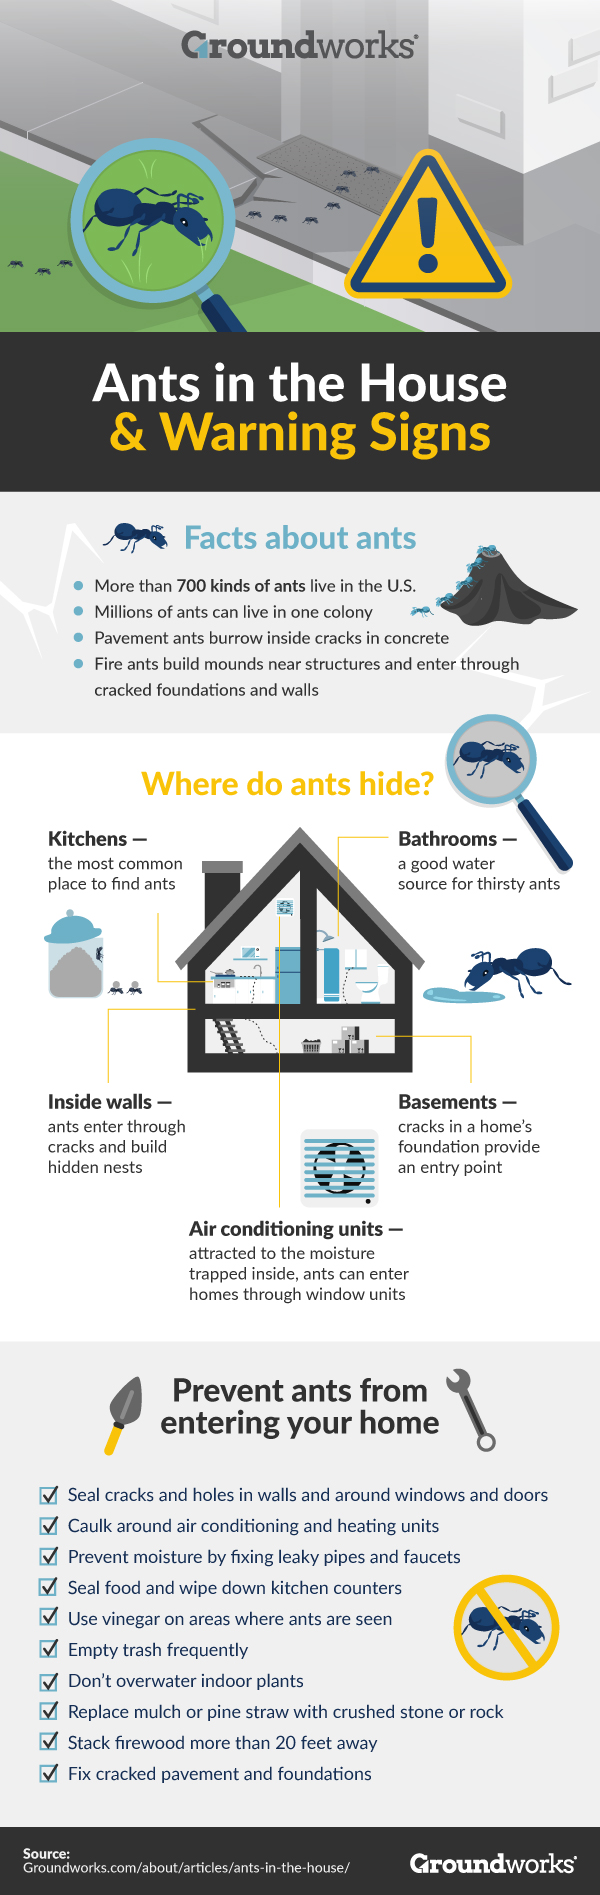 ants-in-the-house-warning-signs-infographic-groundworks